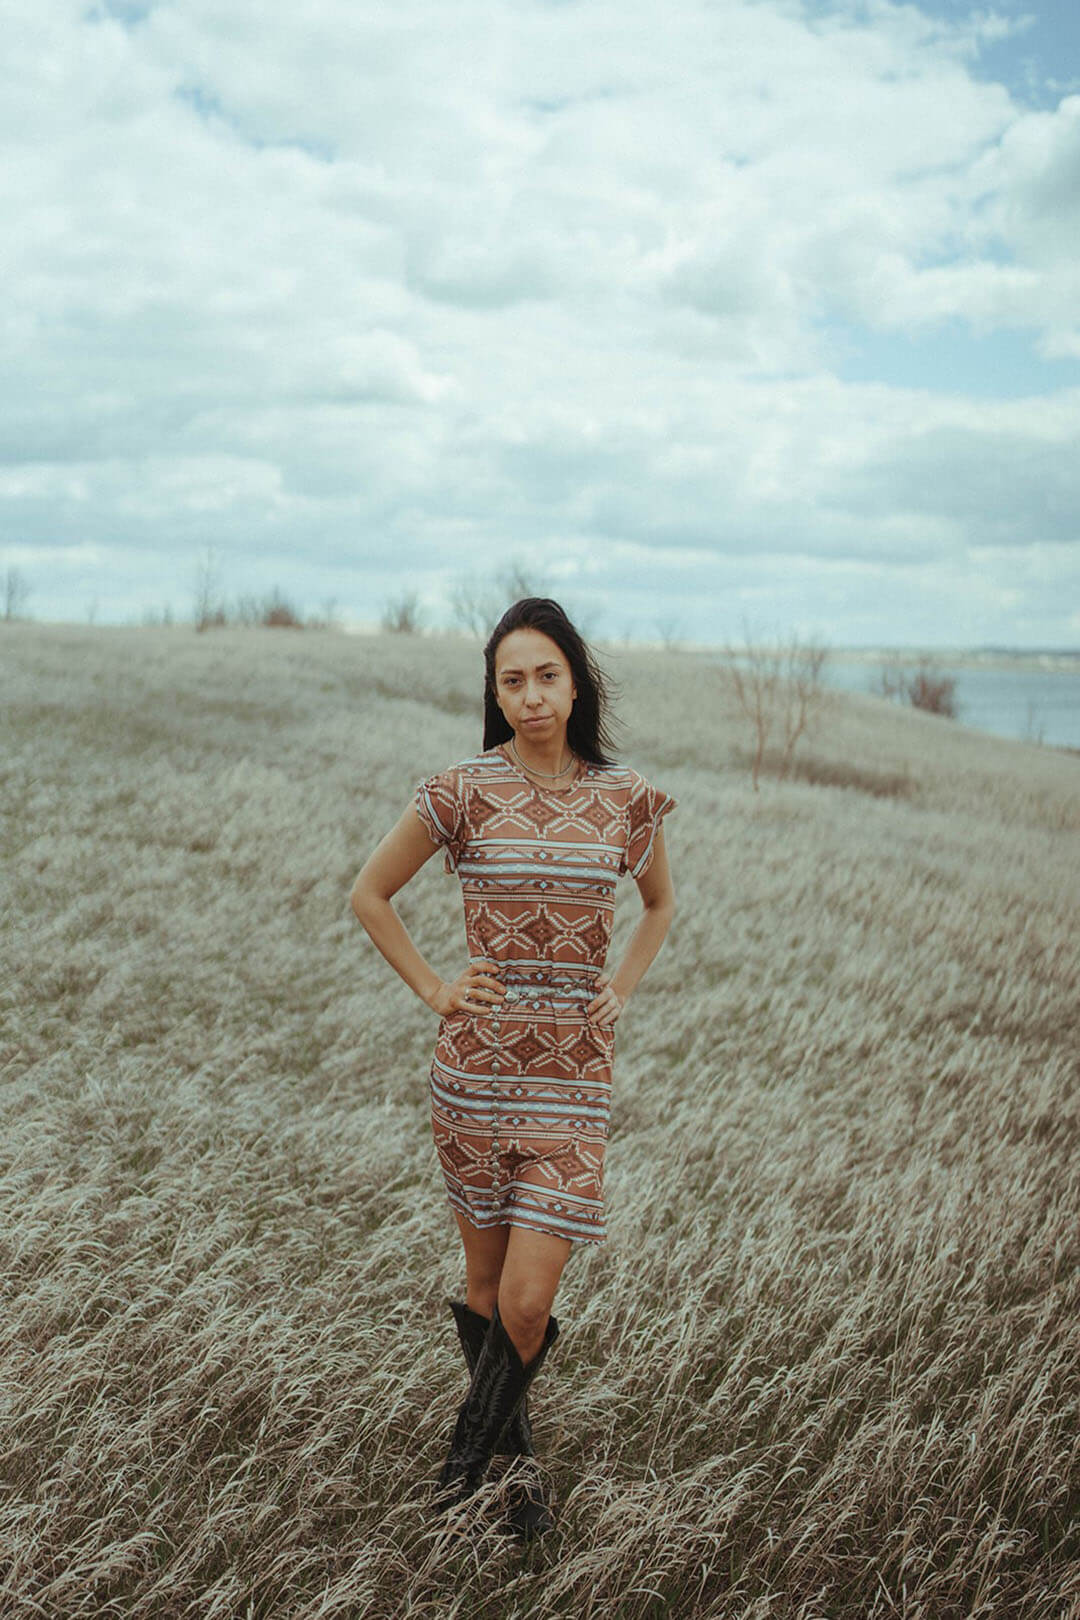 Woman standing in field wearing the Camel Aztec Ribbed Dress.  The dress is more fitted and comes just above the knee.  